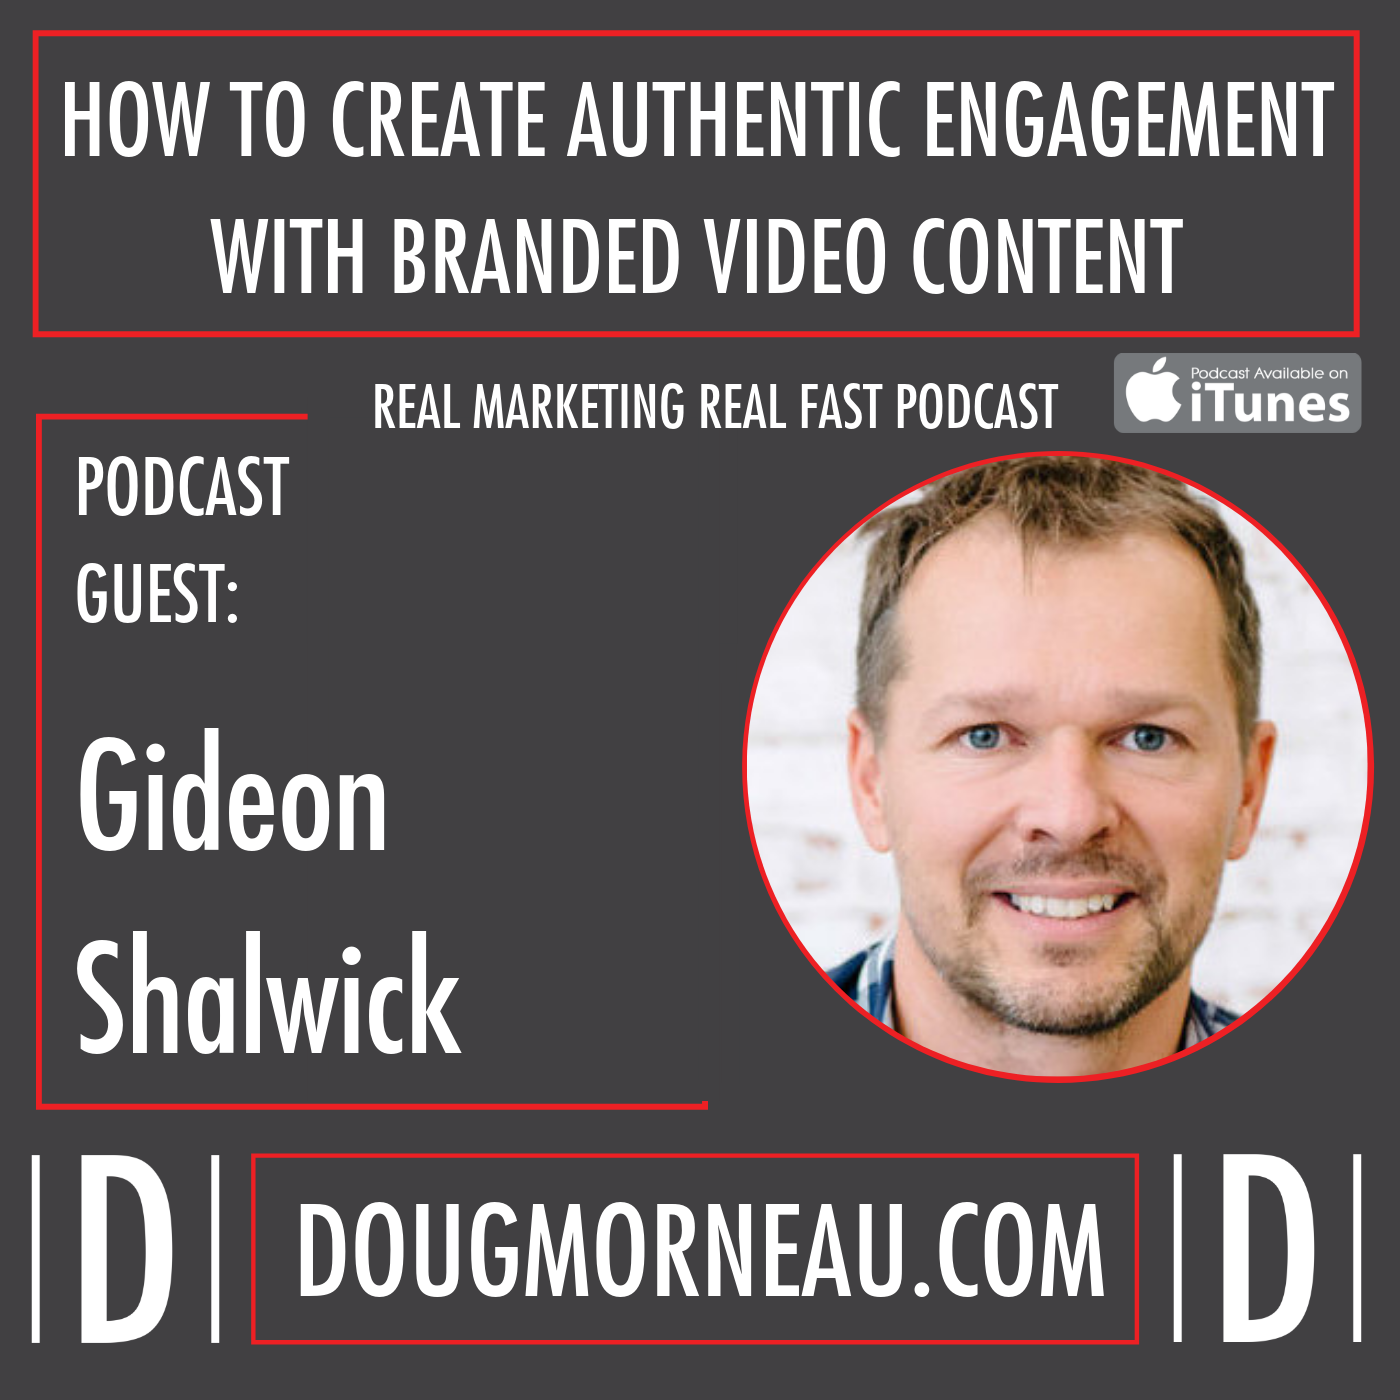 HOW TO CREATE AUTHENTIC ENGAGEMENT WITH BRANDED VIDEO CONTENT GIDEON SHALWICK - DOUG MORNEAU - REAL MARKETING REAL FAST PODCAST